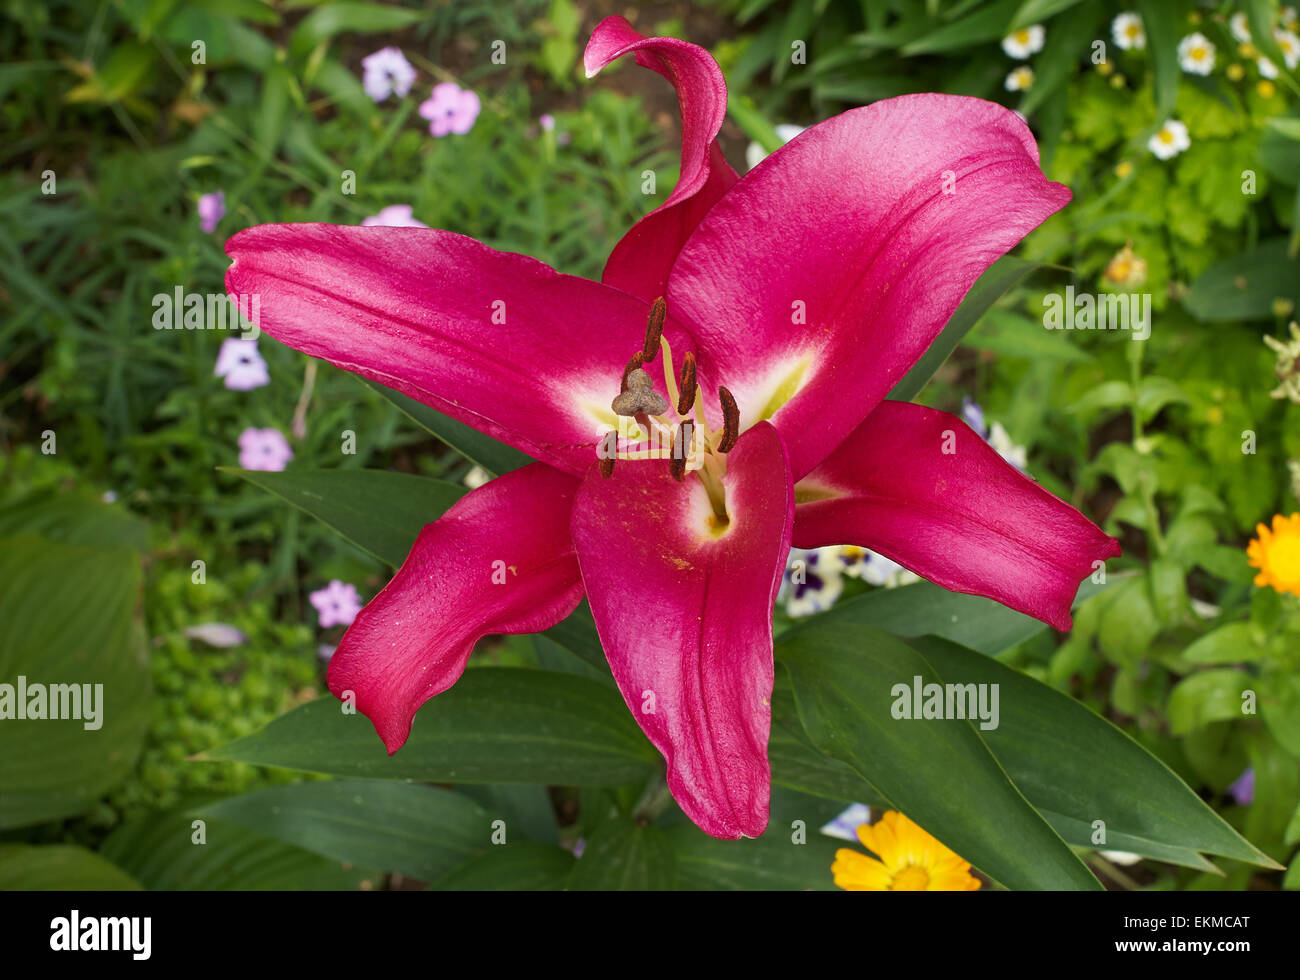 Lilium the one assets.standup2cancer.org :